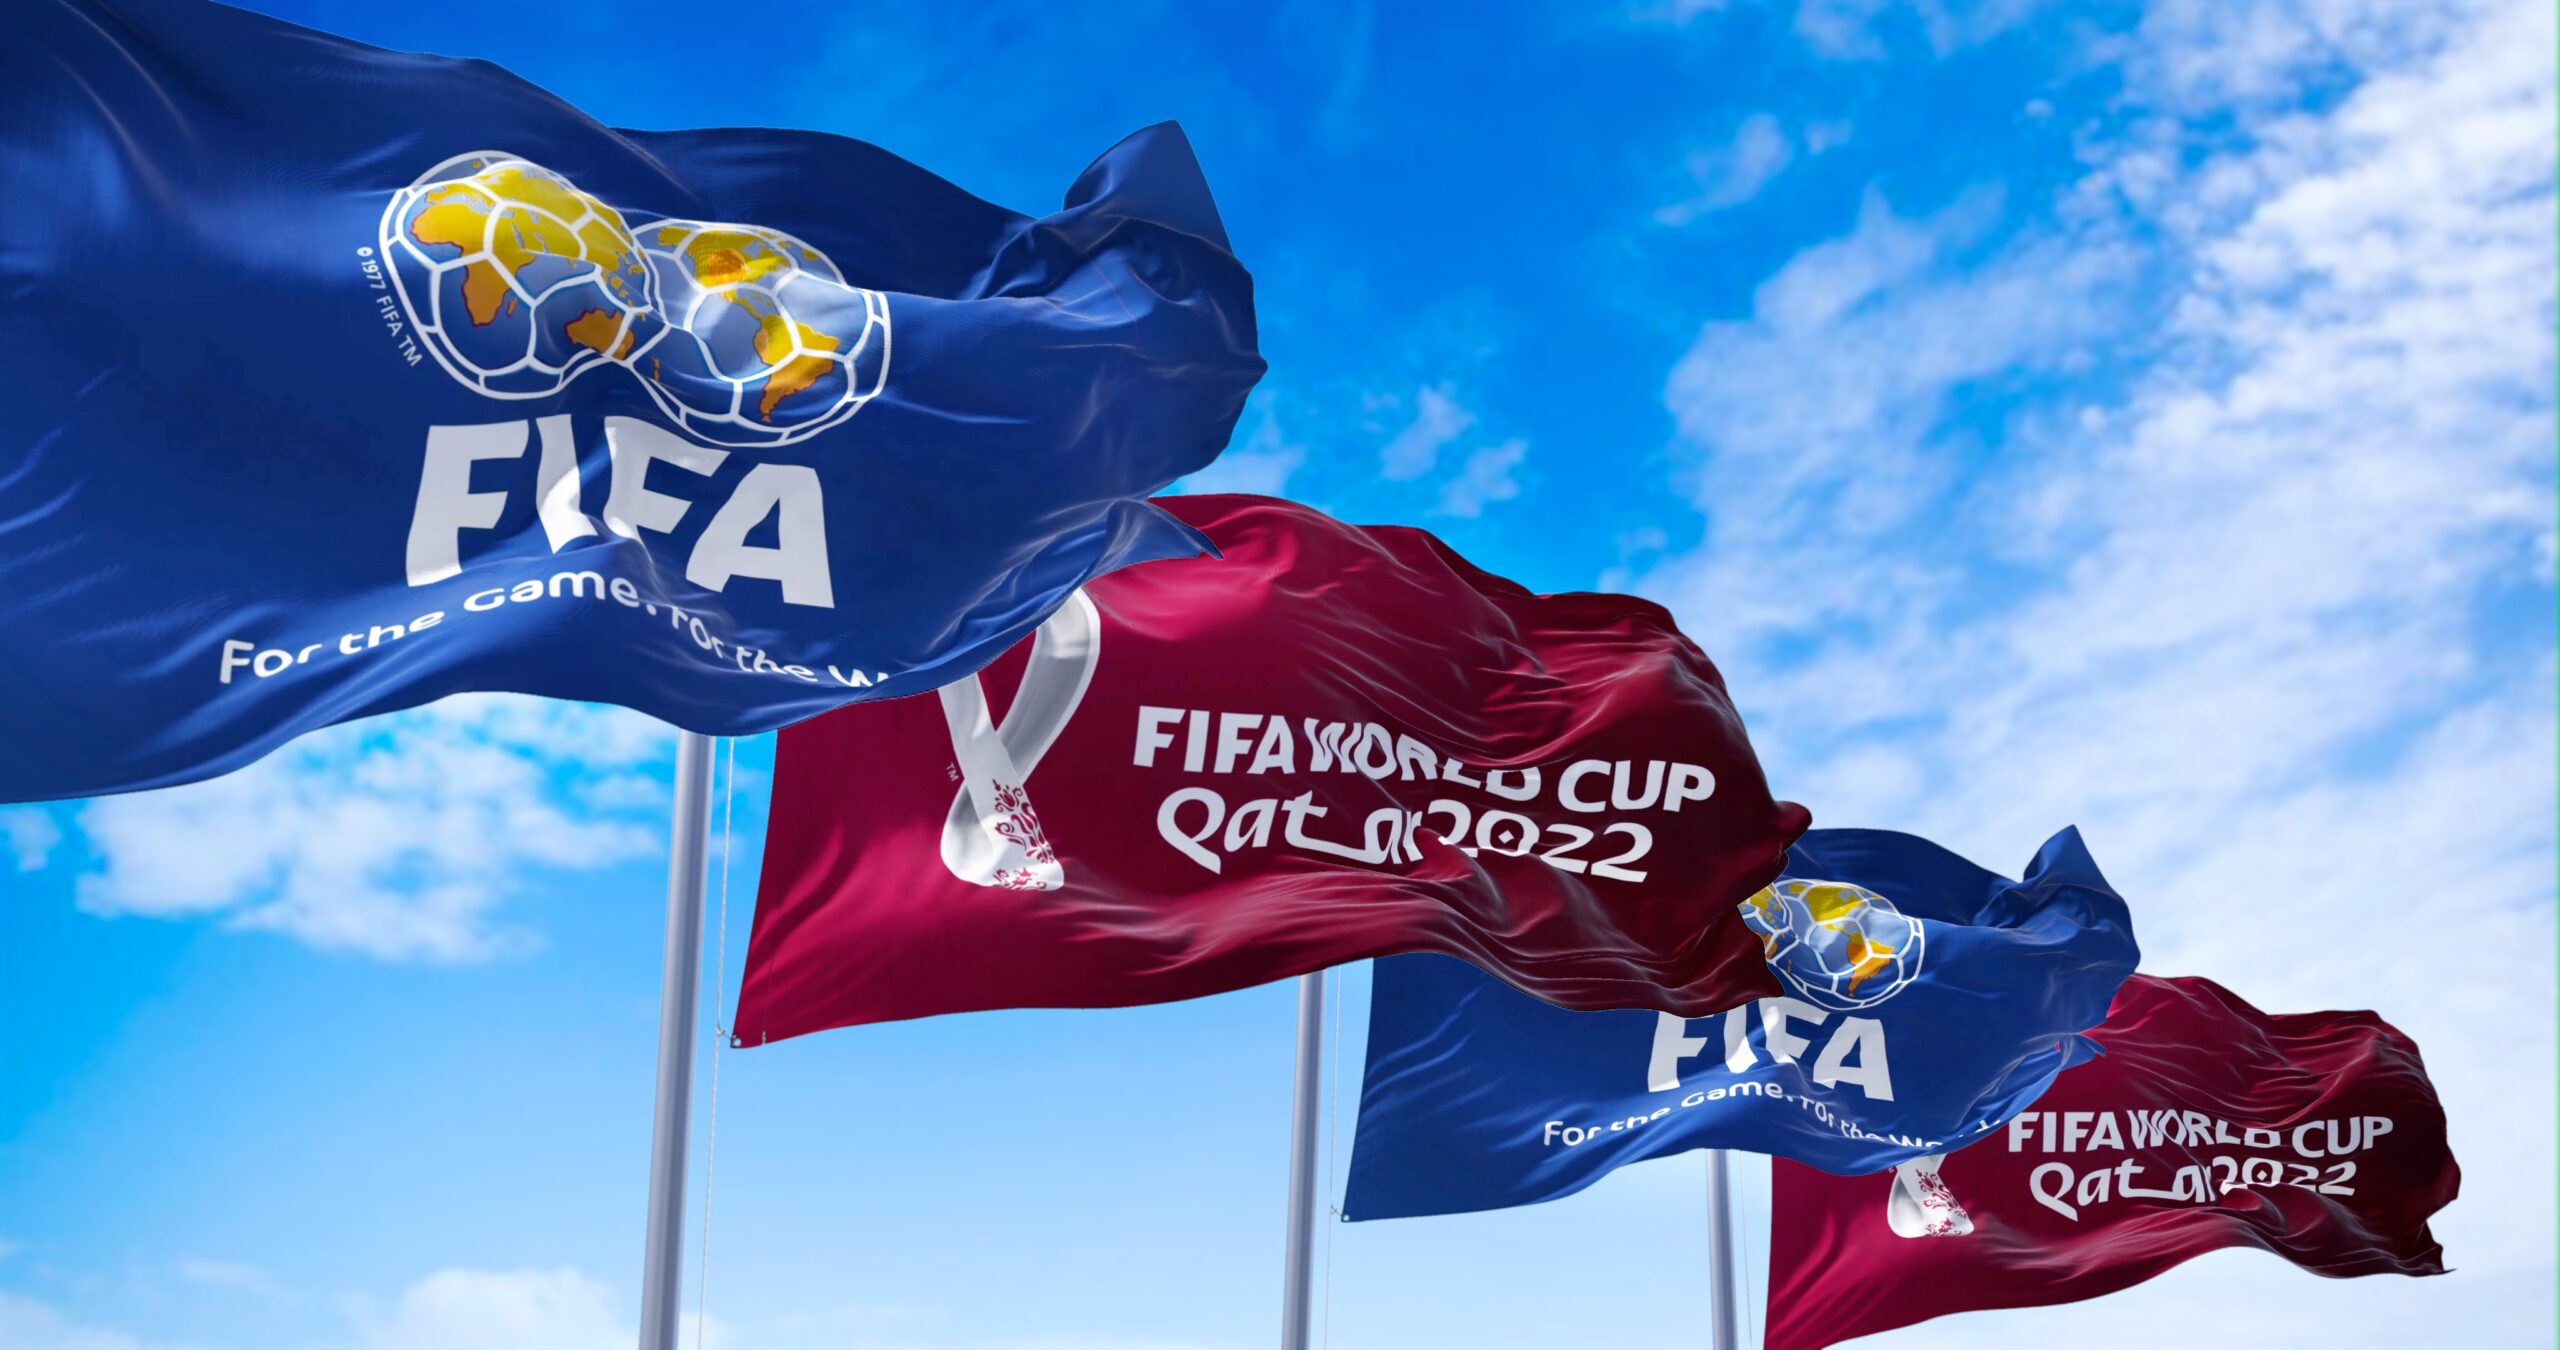 Playing On-Side at the World Cup - FIFA's Advertising Rights & Rules